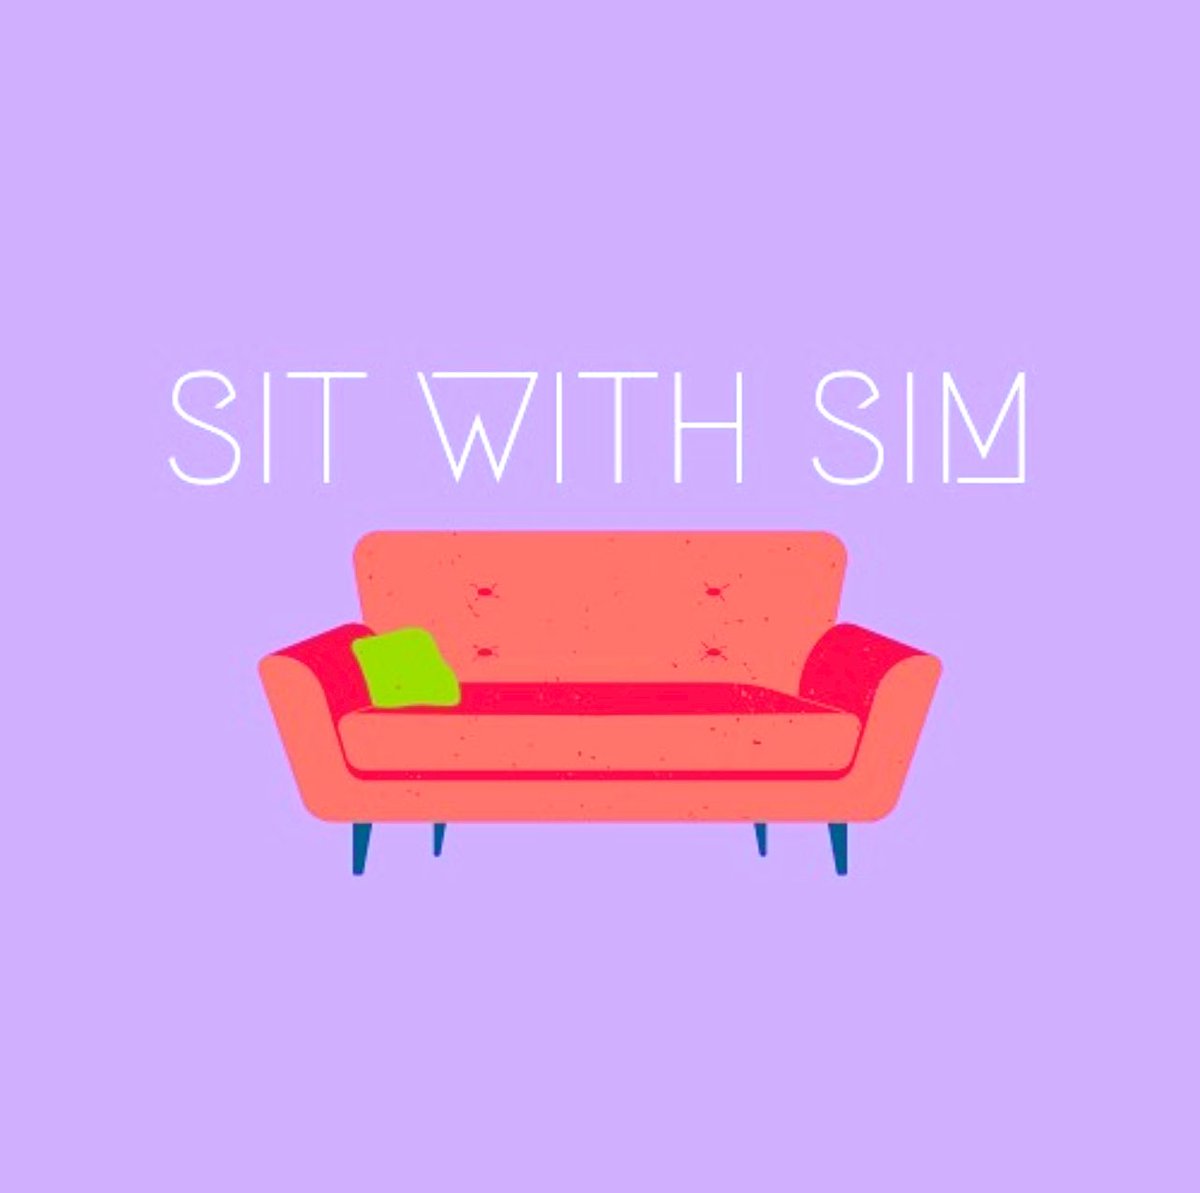 Sit with me through this journey of discussing all topics pertaining our mental health. Open discussions about wellness and a safe space where all are welcome!

More coming soon;
.
.
.
#mentalhealth #mentalhealthawareness #mentalhealthmatters #counsellingpsychology 
#sitwithsim